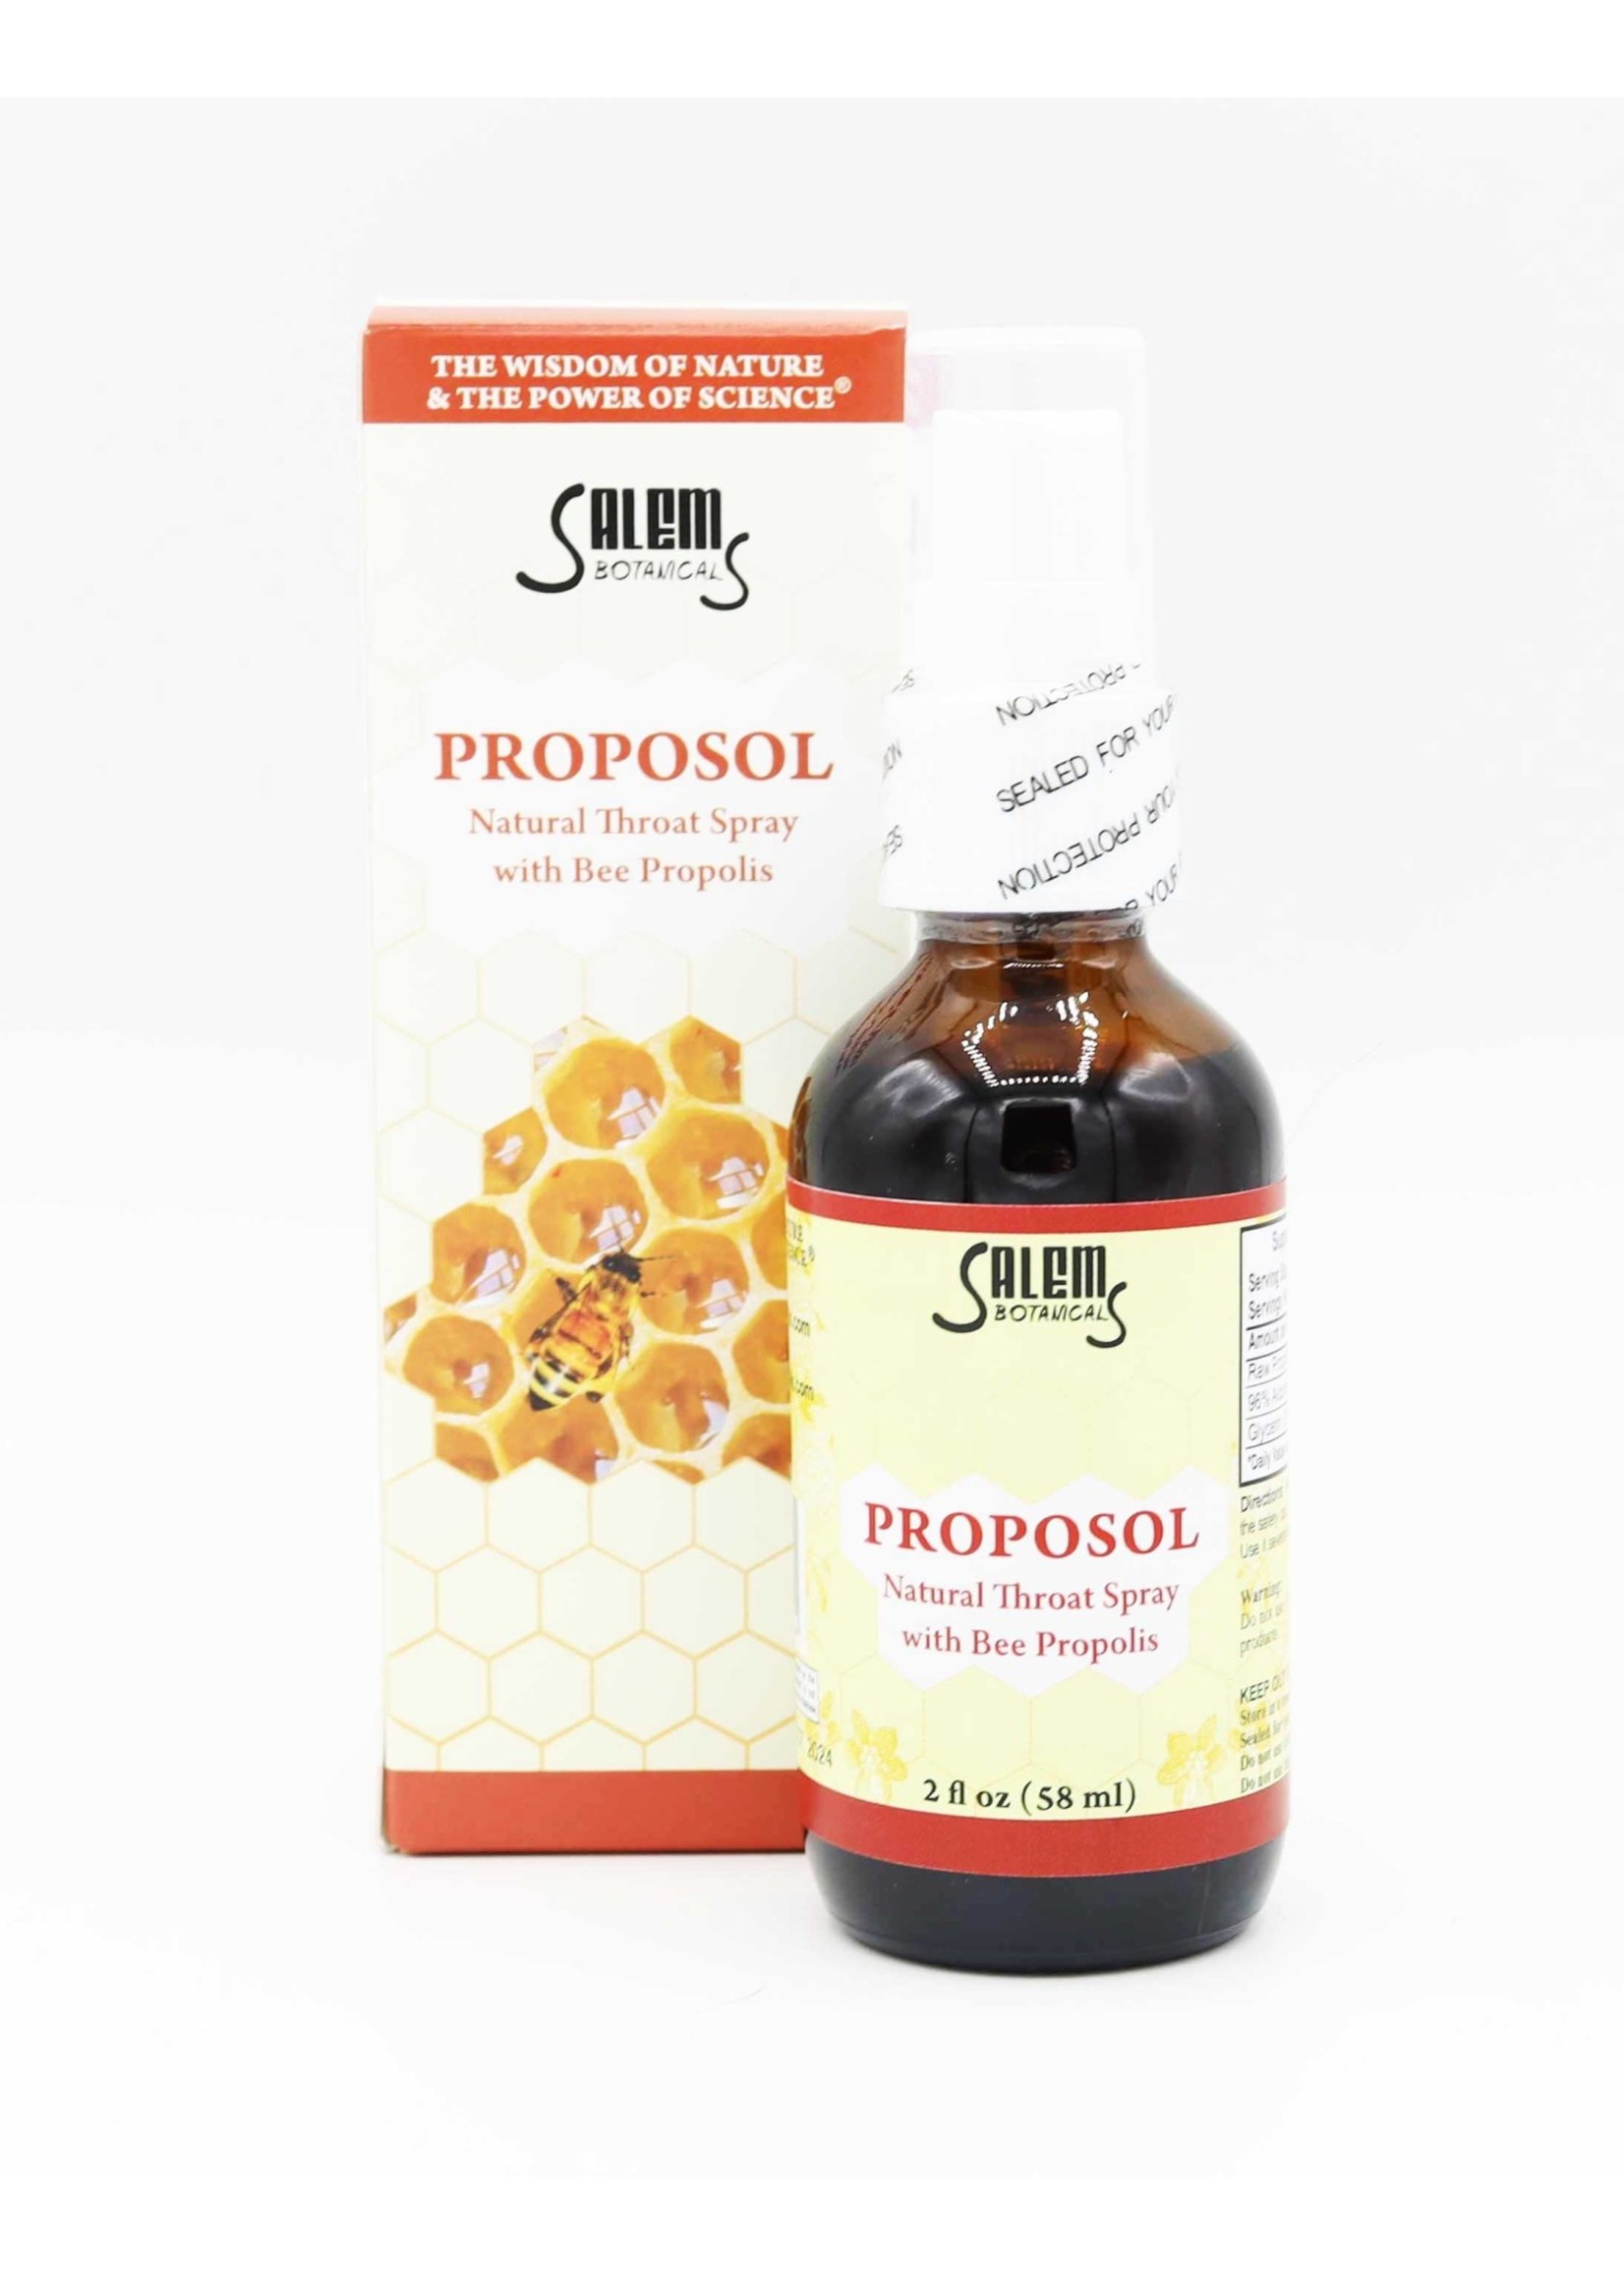 Proposol Natural Throat Spray with Bee Propolis